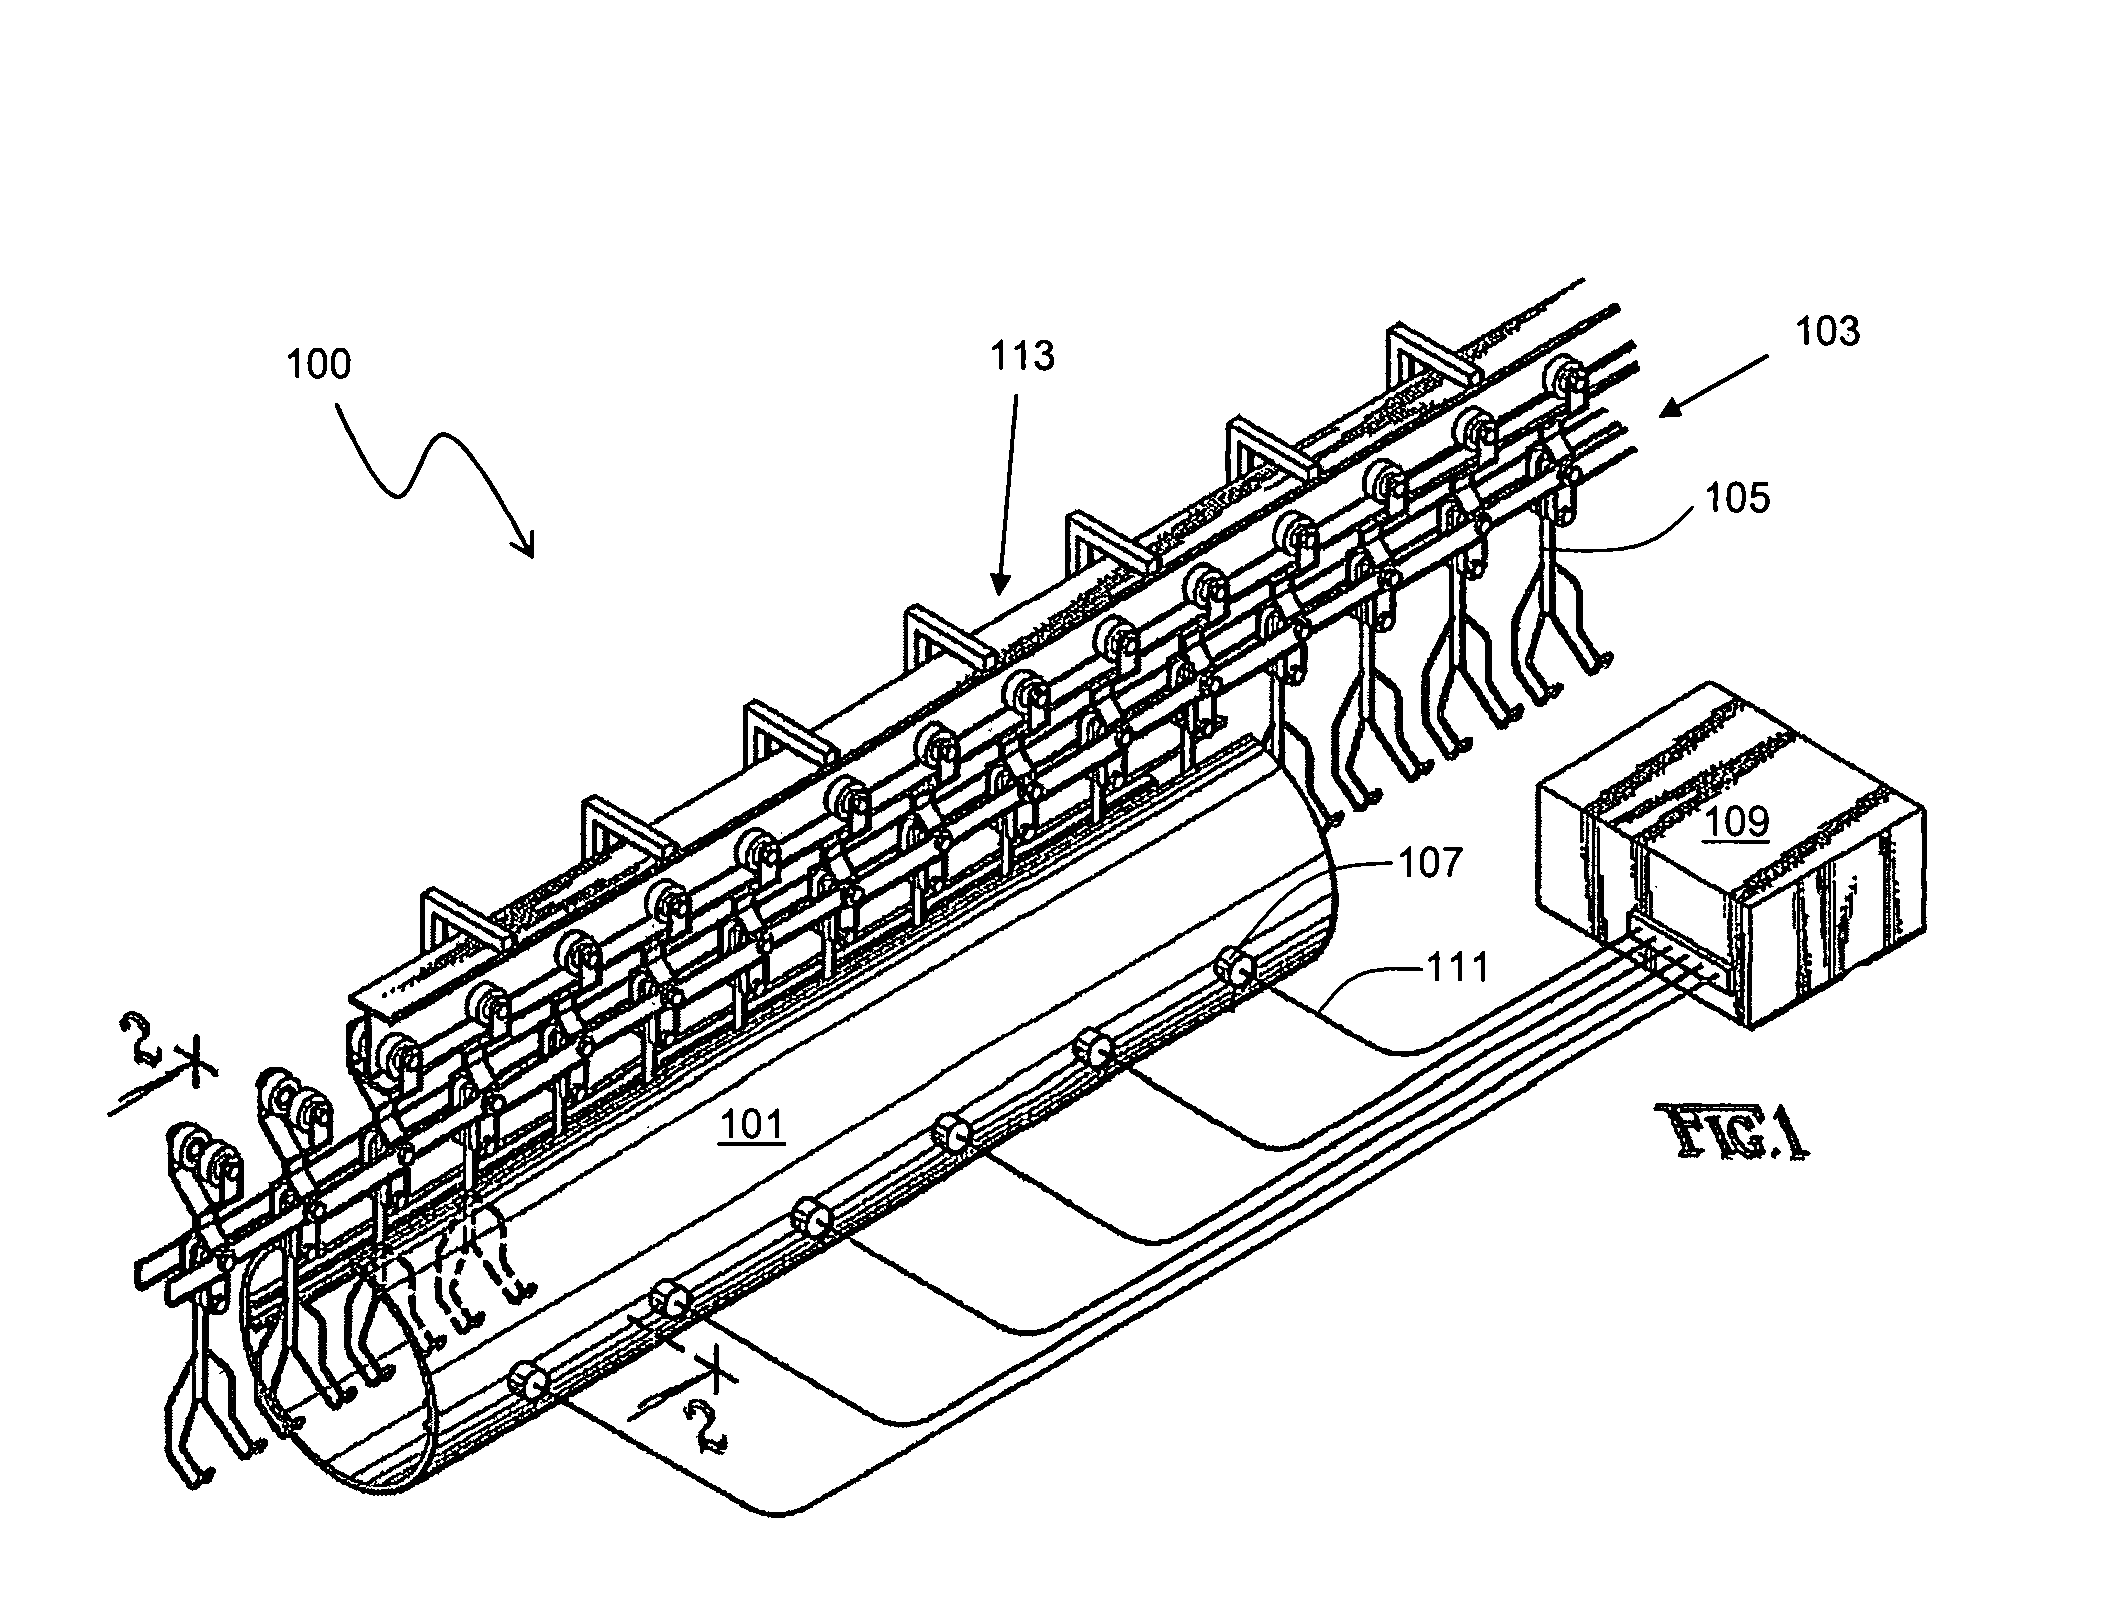 Microwave poultry processing device and method